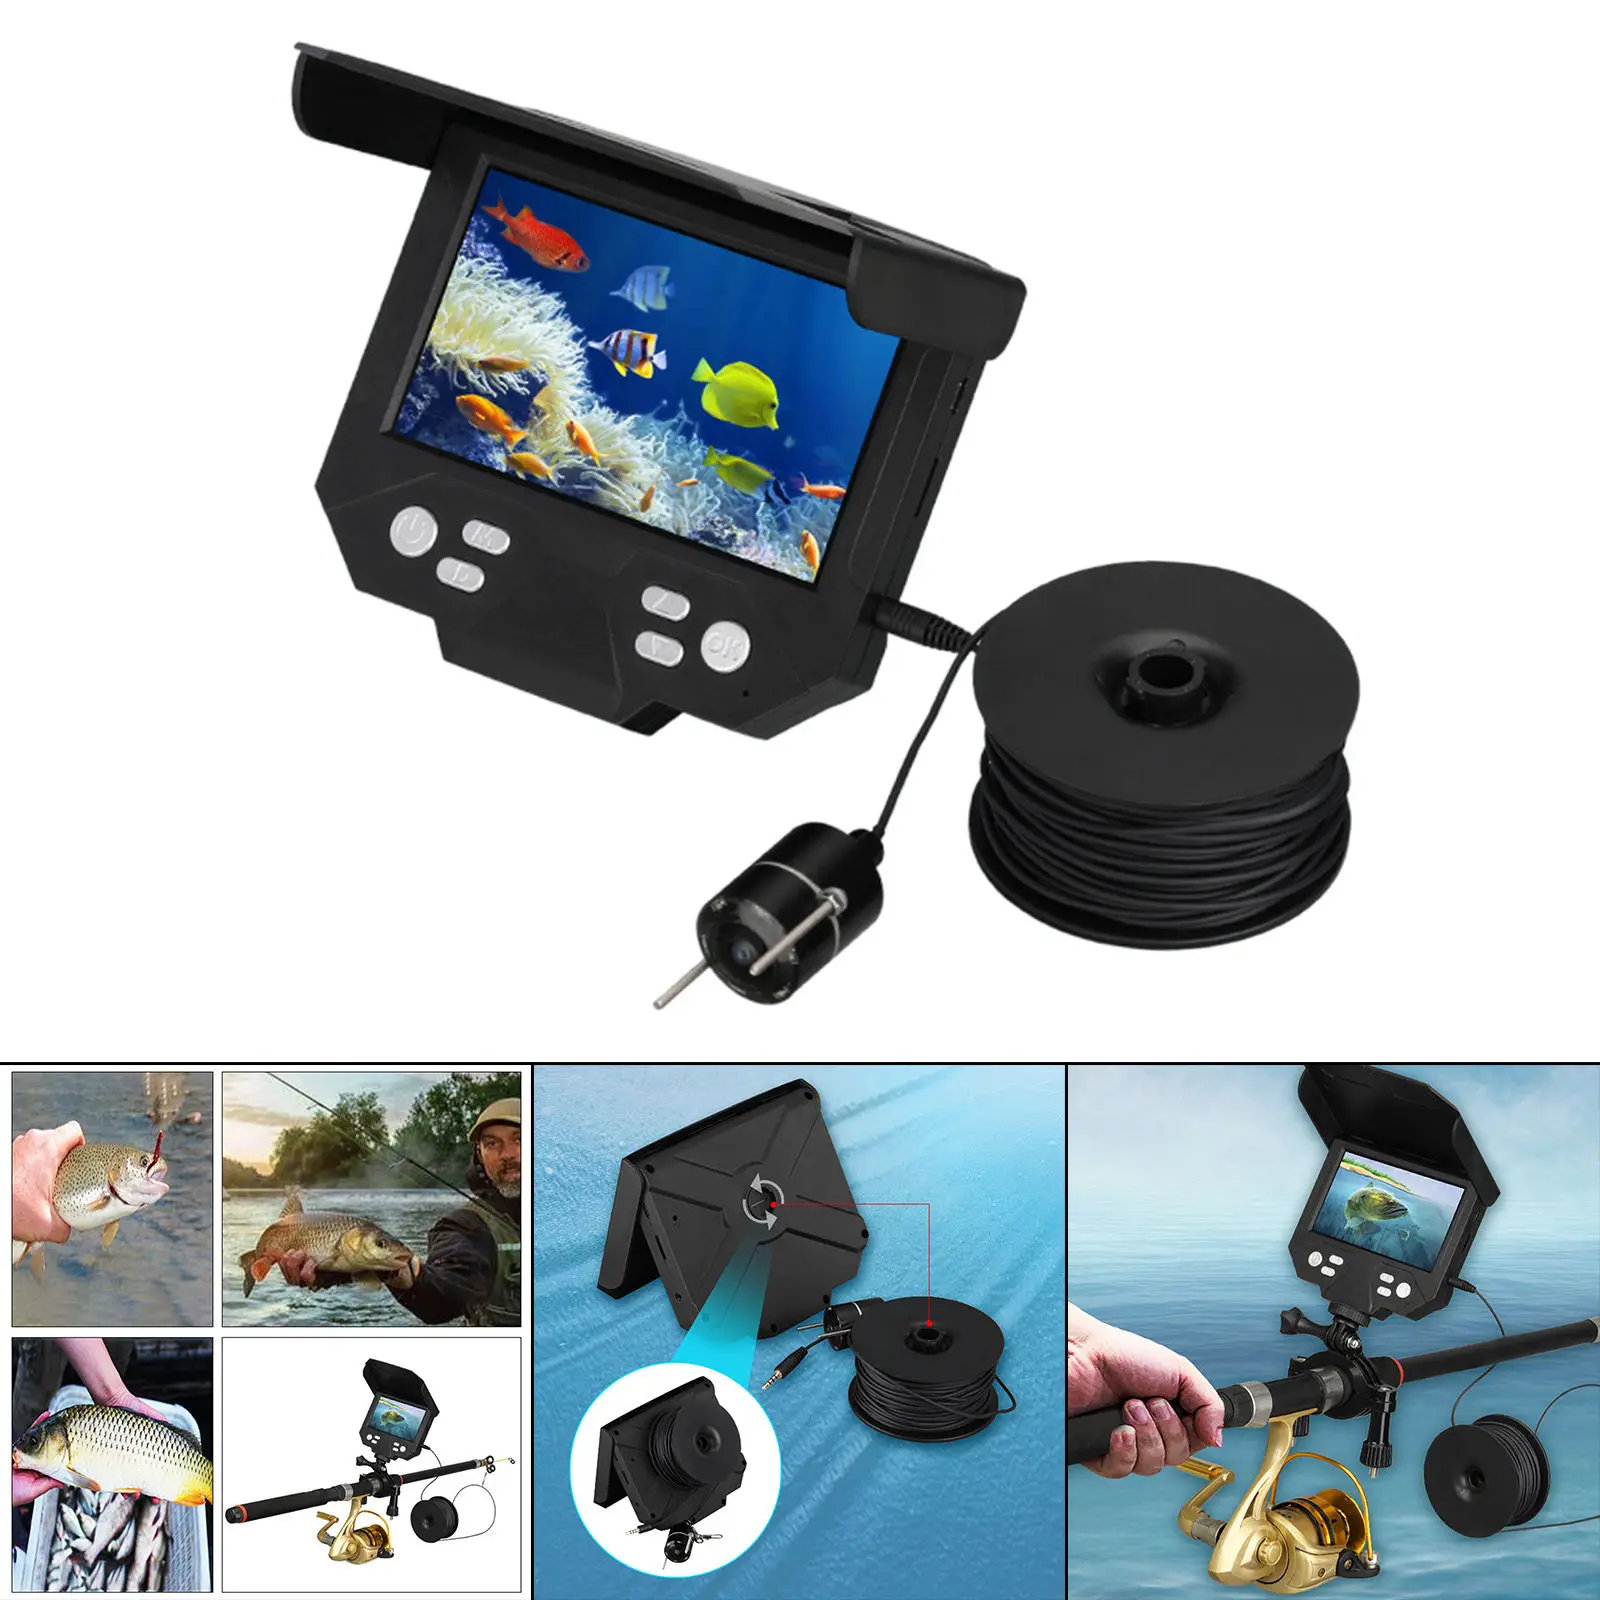 Fish Finder Camera, 4.3inch LCD Monitor, 30M Depth, Tackles Infrared LED Light Night Visible Underwater Fishing Detector